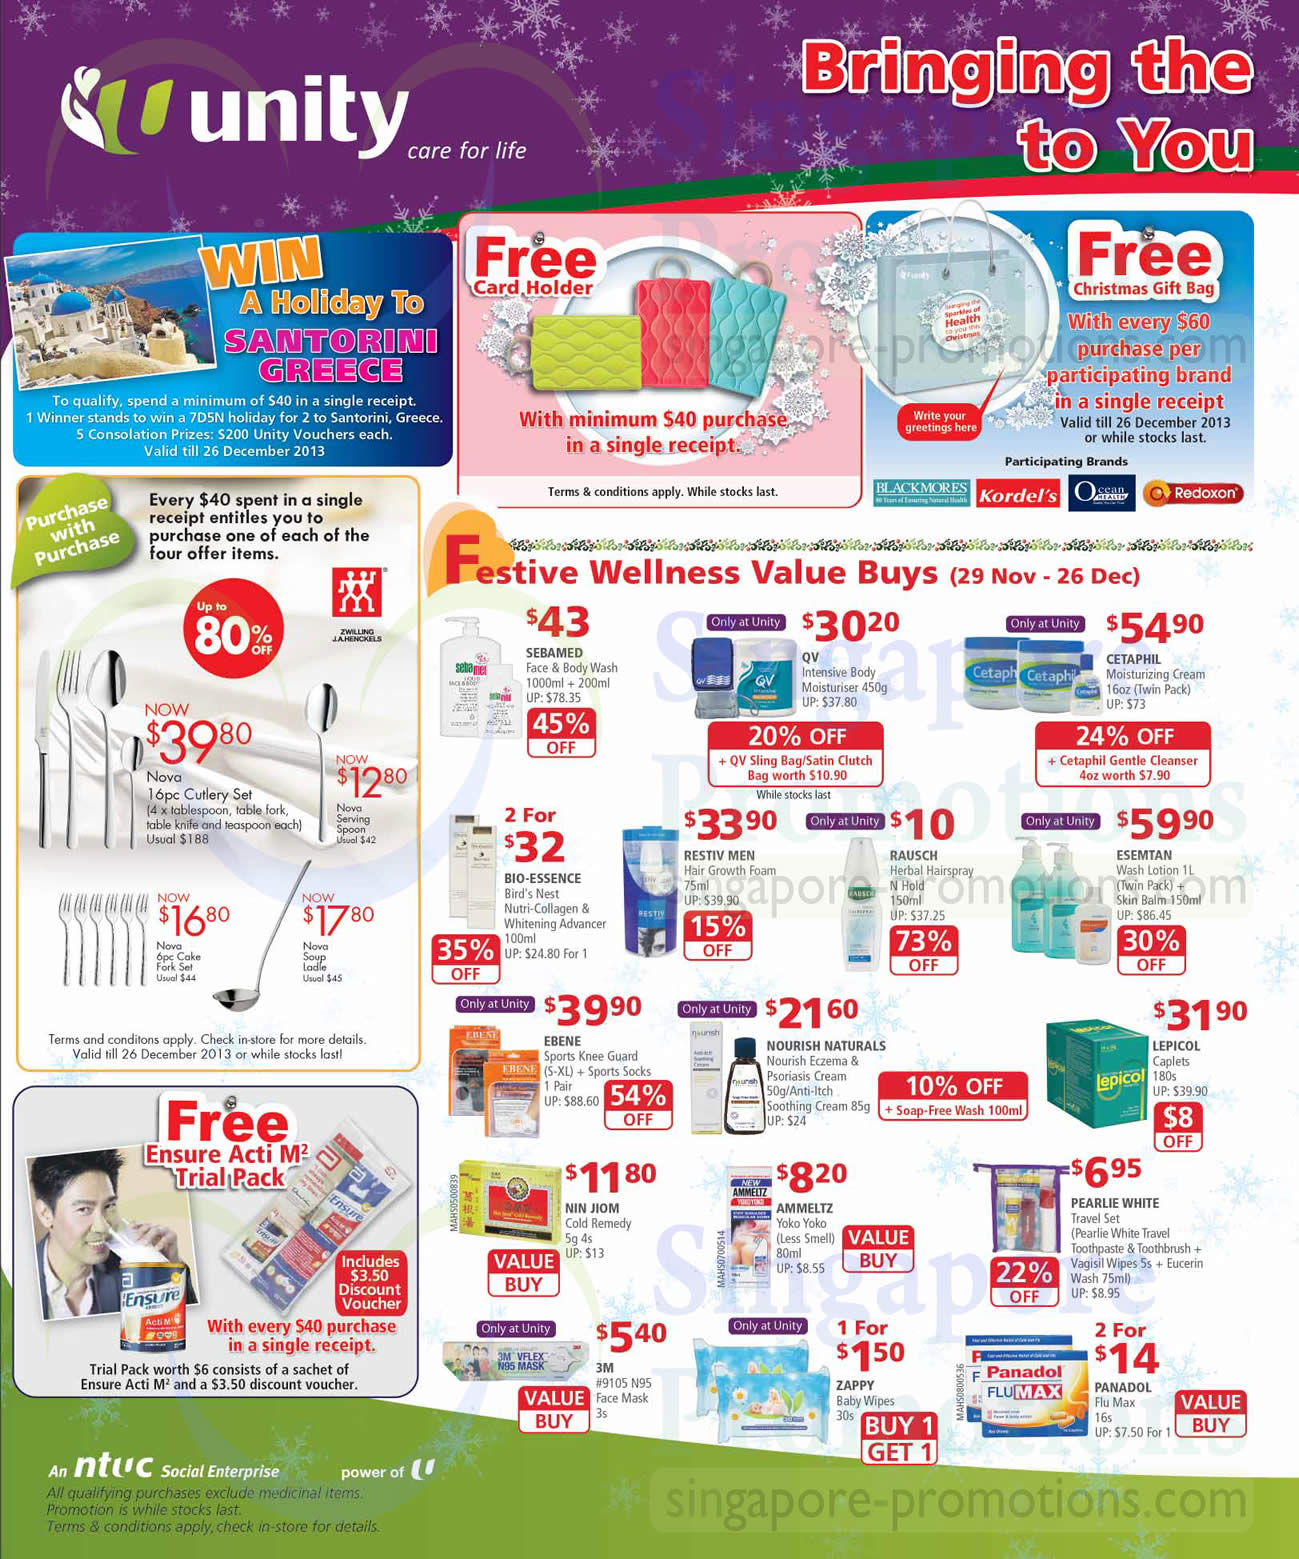 Featured image for NTUC Unity Health Offers & Promotions 29 Nov - 26 Dec 2013